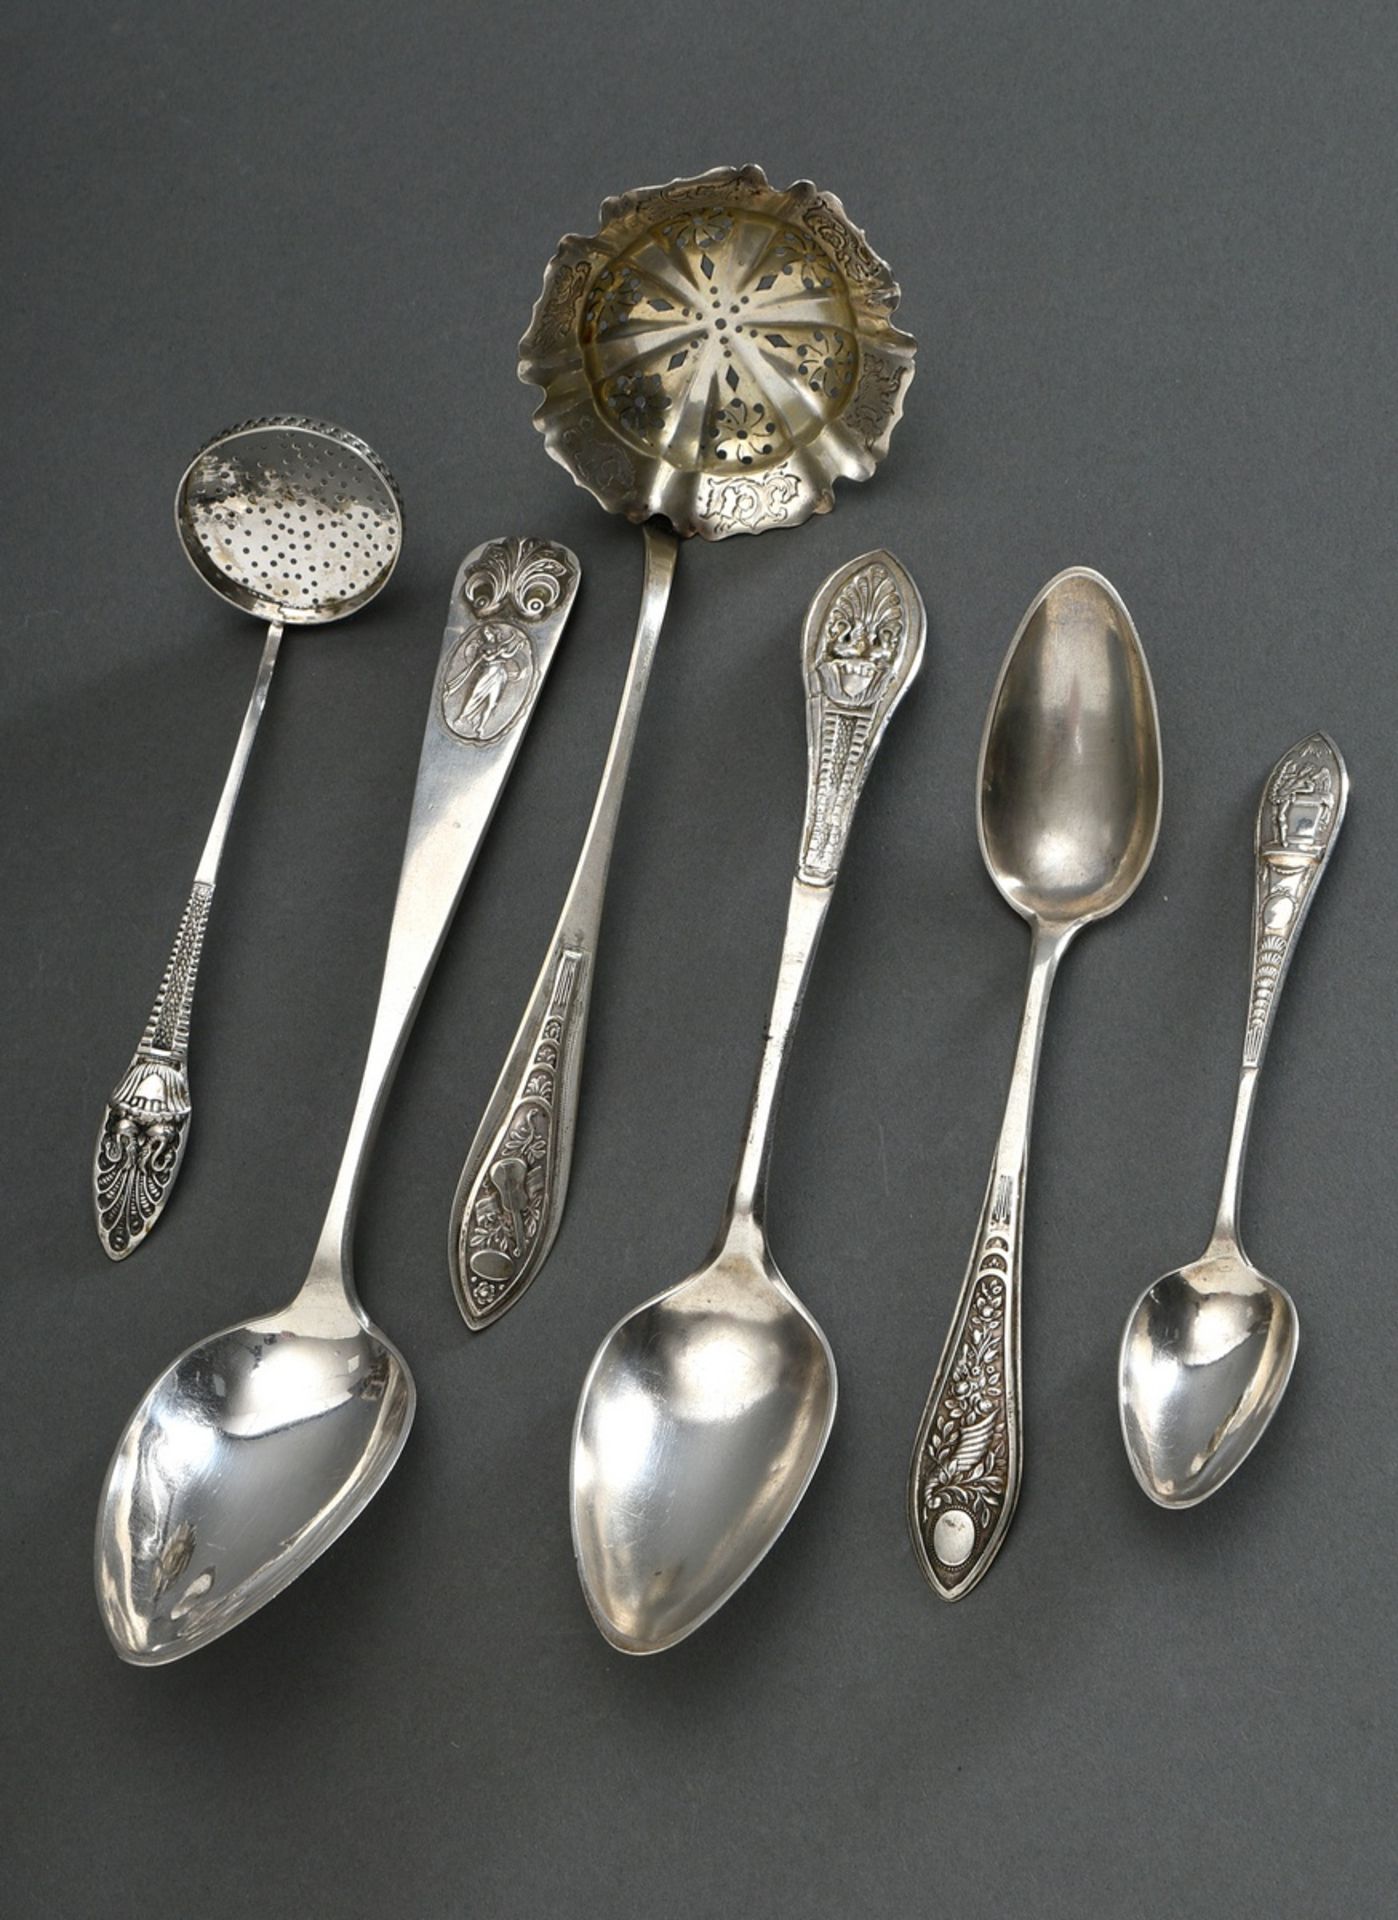 6 Various Biedermeier cutlery pieces (spoons/ sieve ladles) with richly reliefed handle ends and en